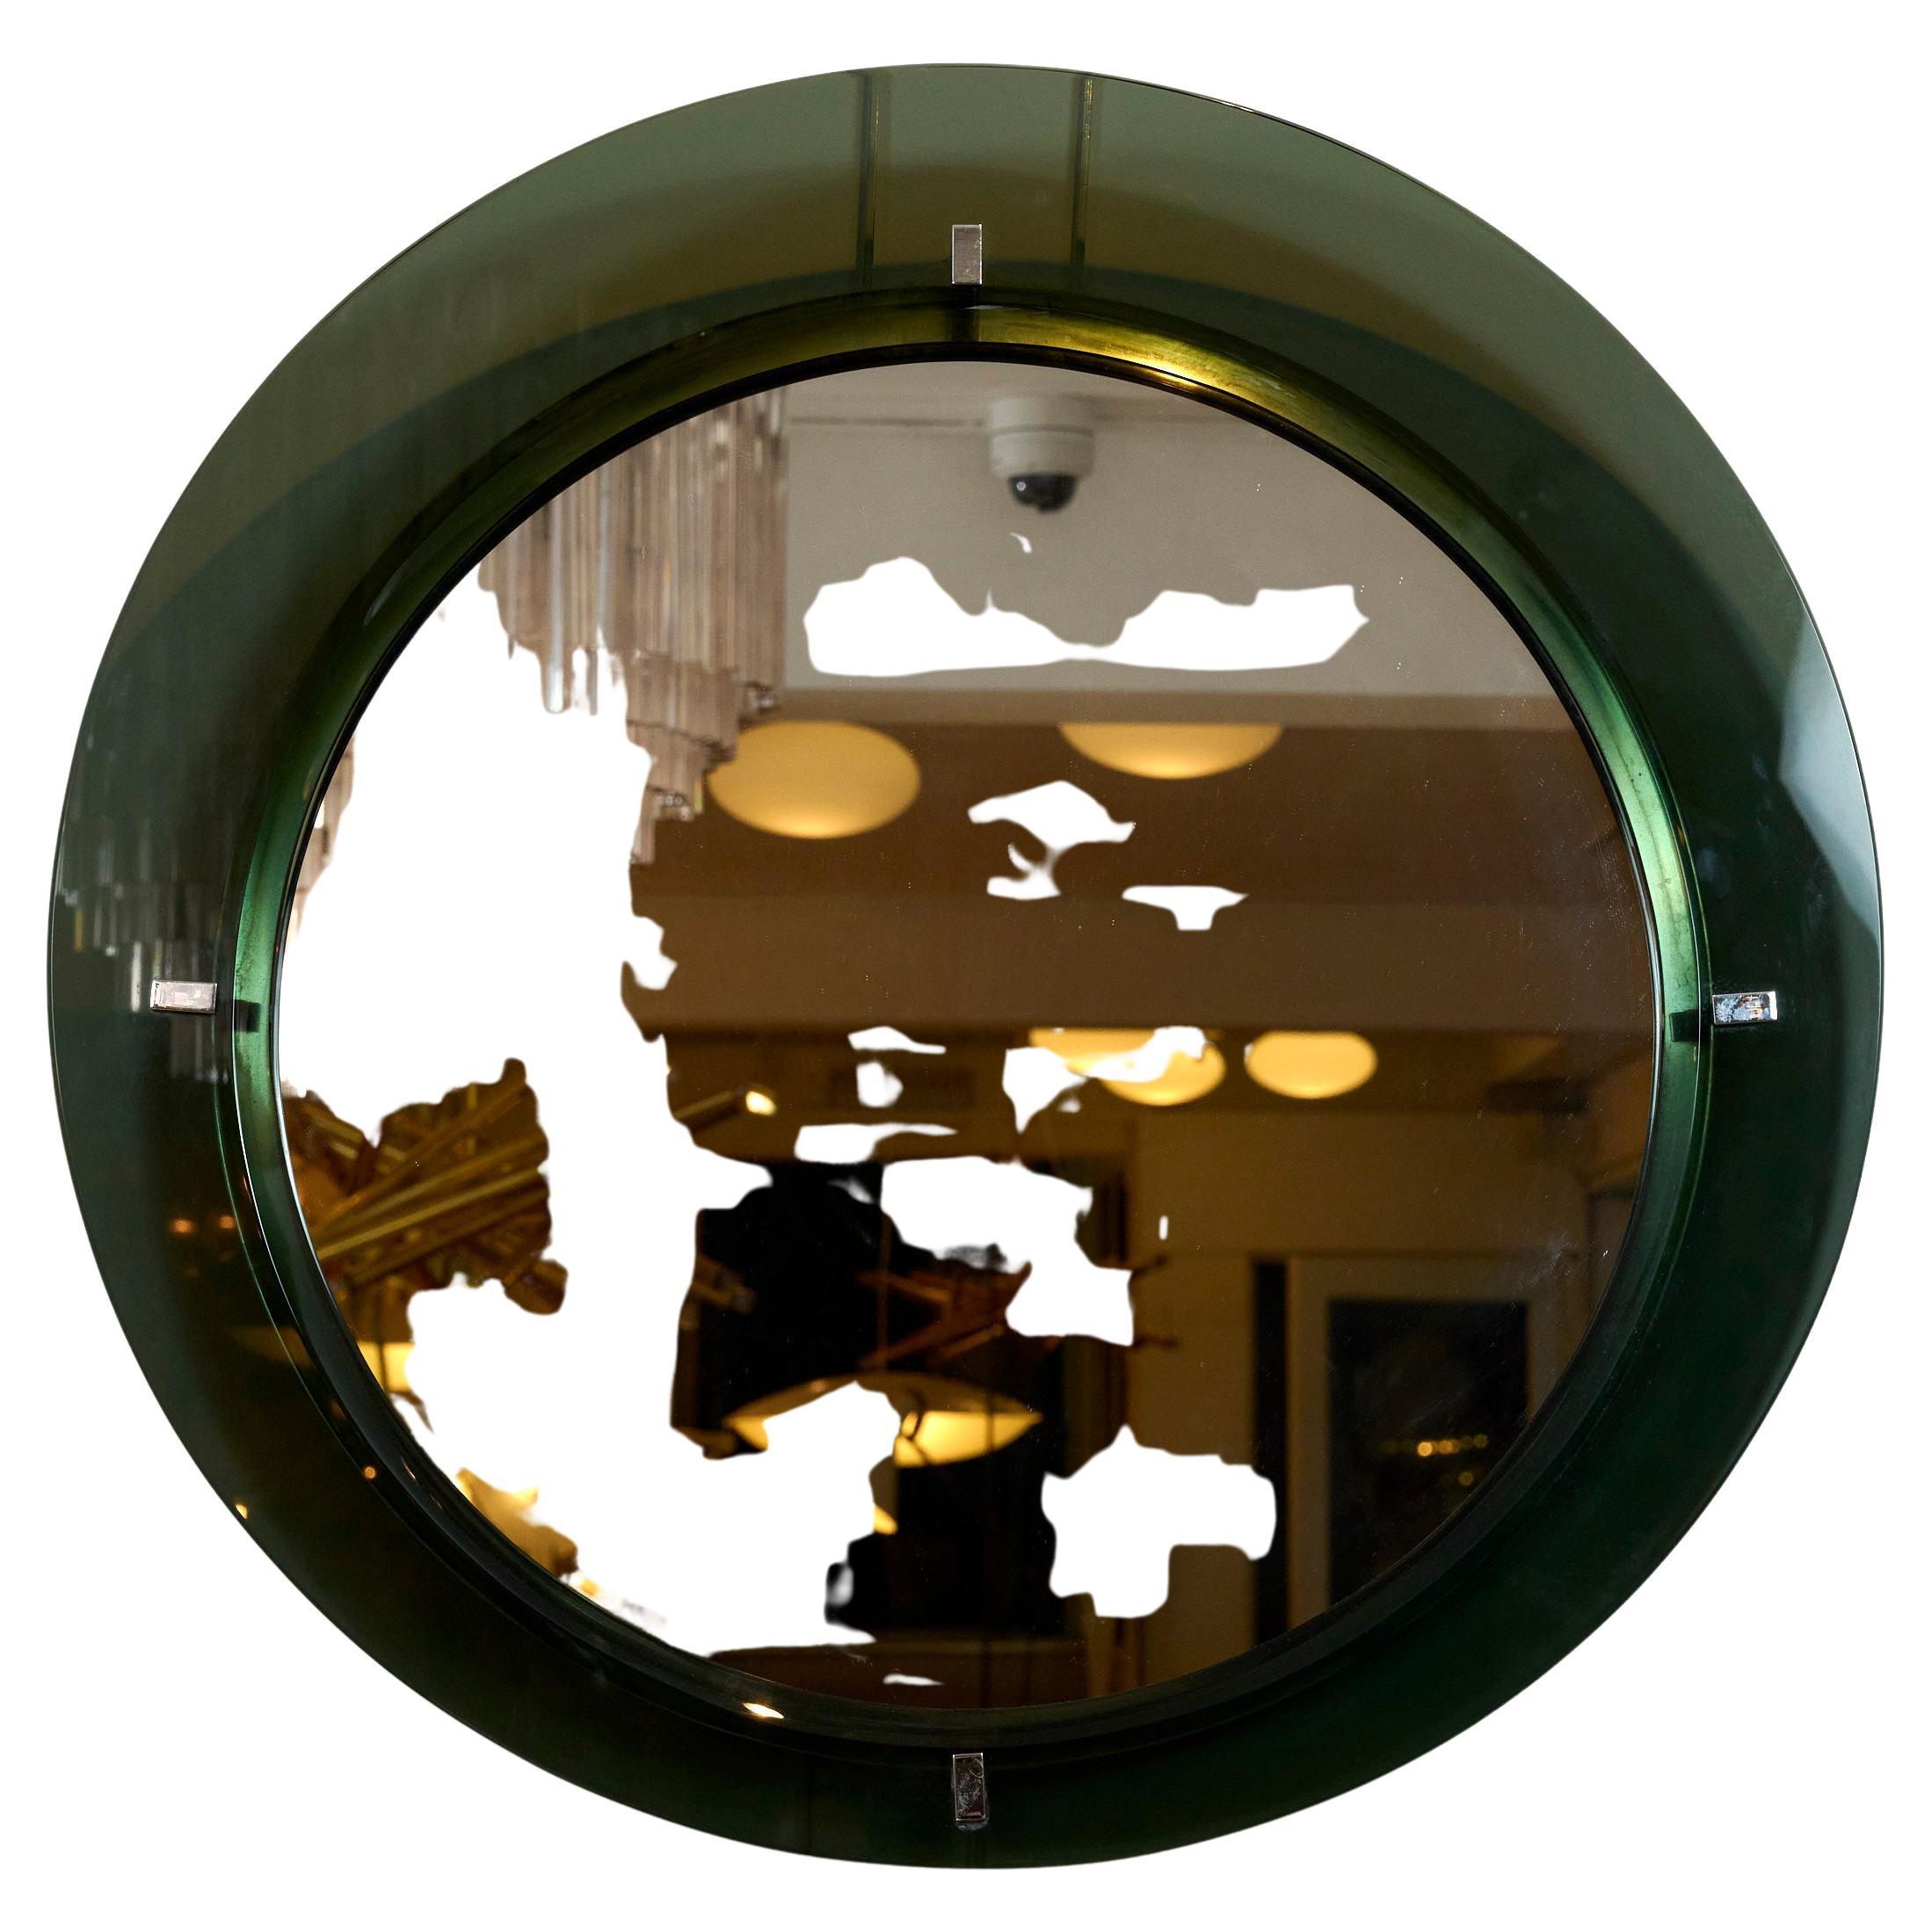 Circular mirror with green glass frame in the style of Fontana Arte.

